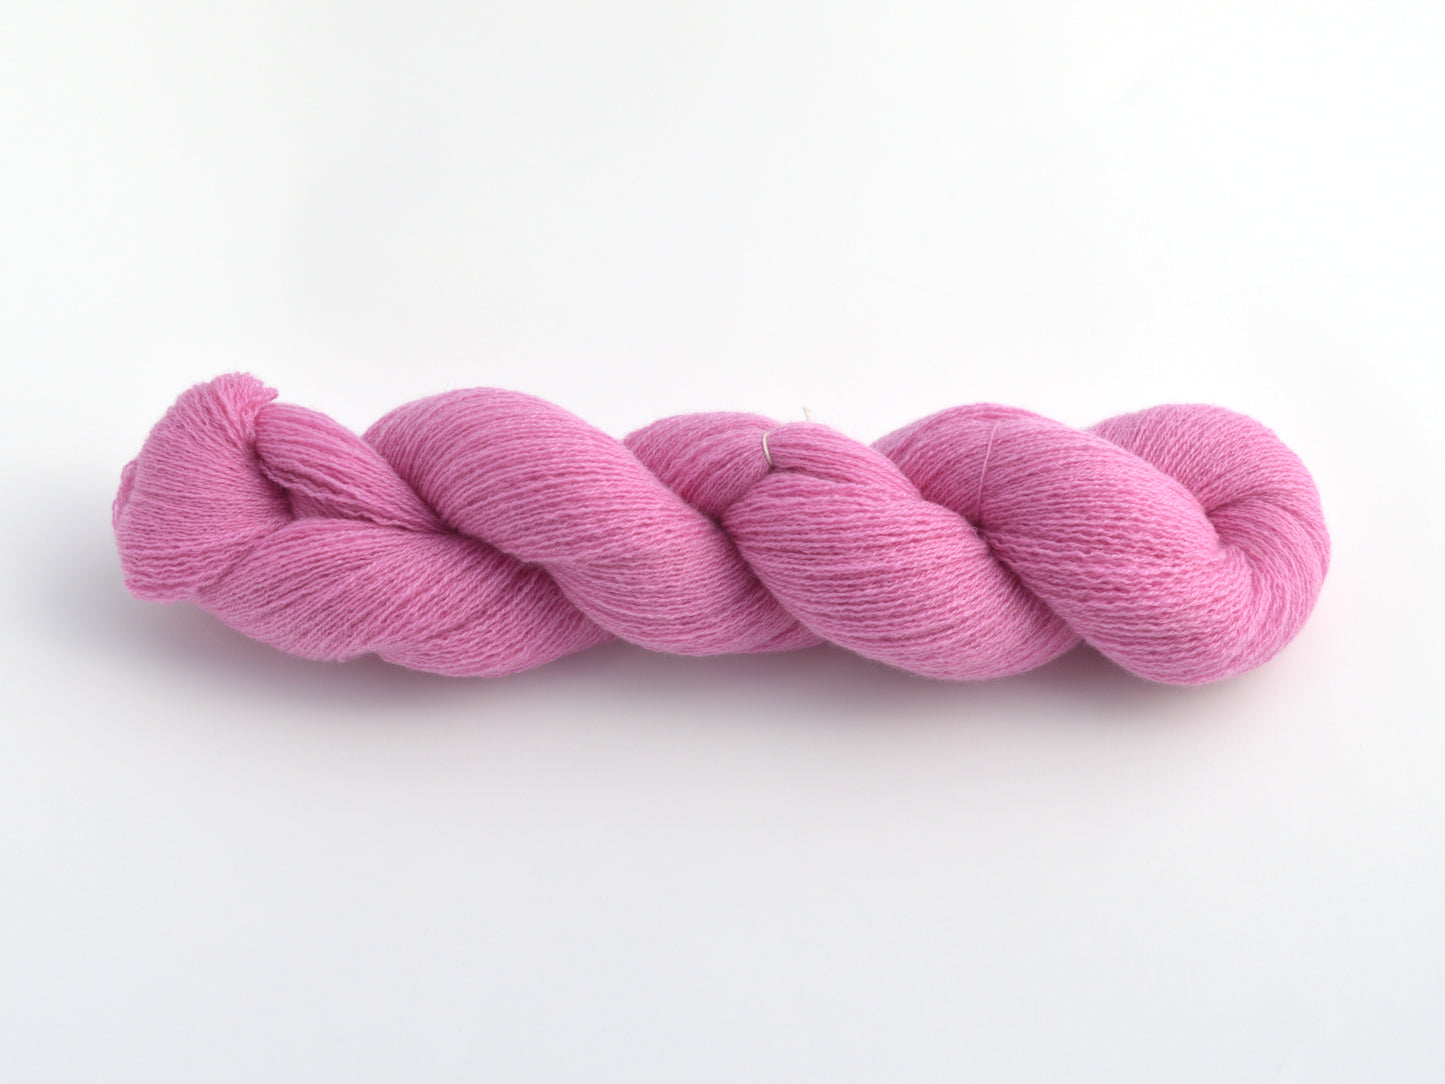 Lace Weight Cashmere Recycled Yarn in Carnation Pink